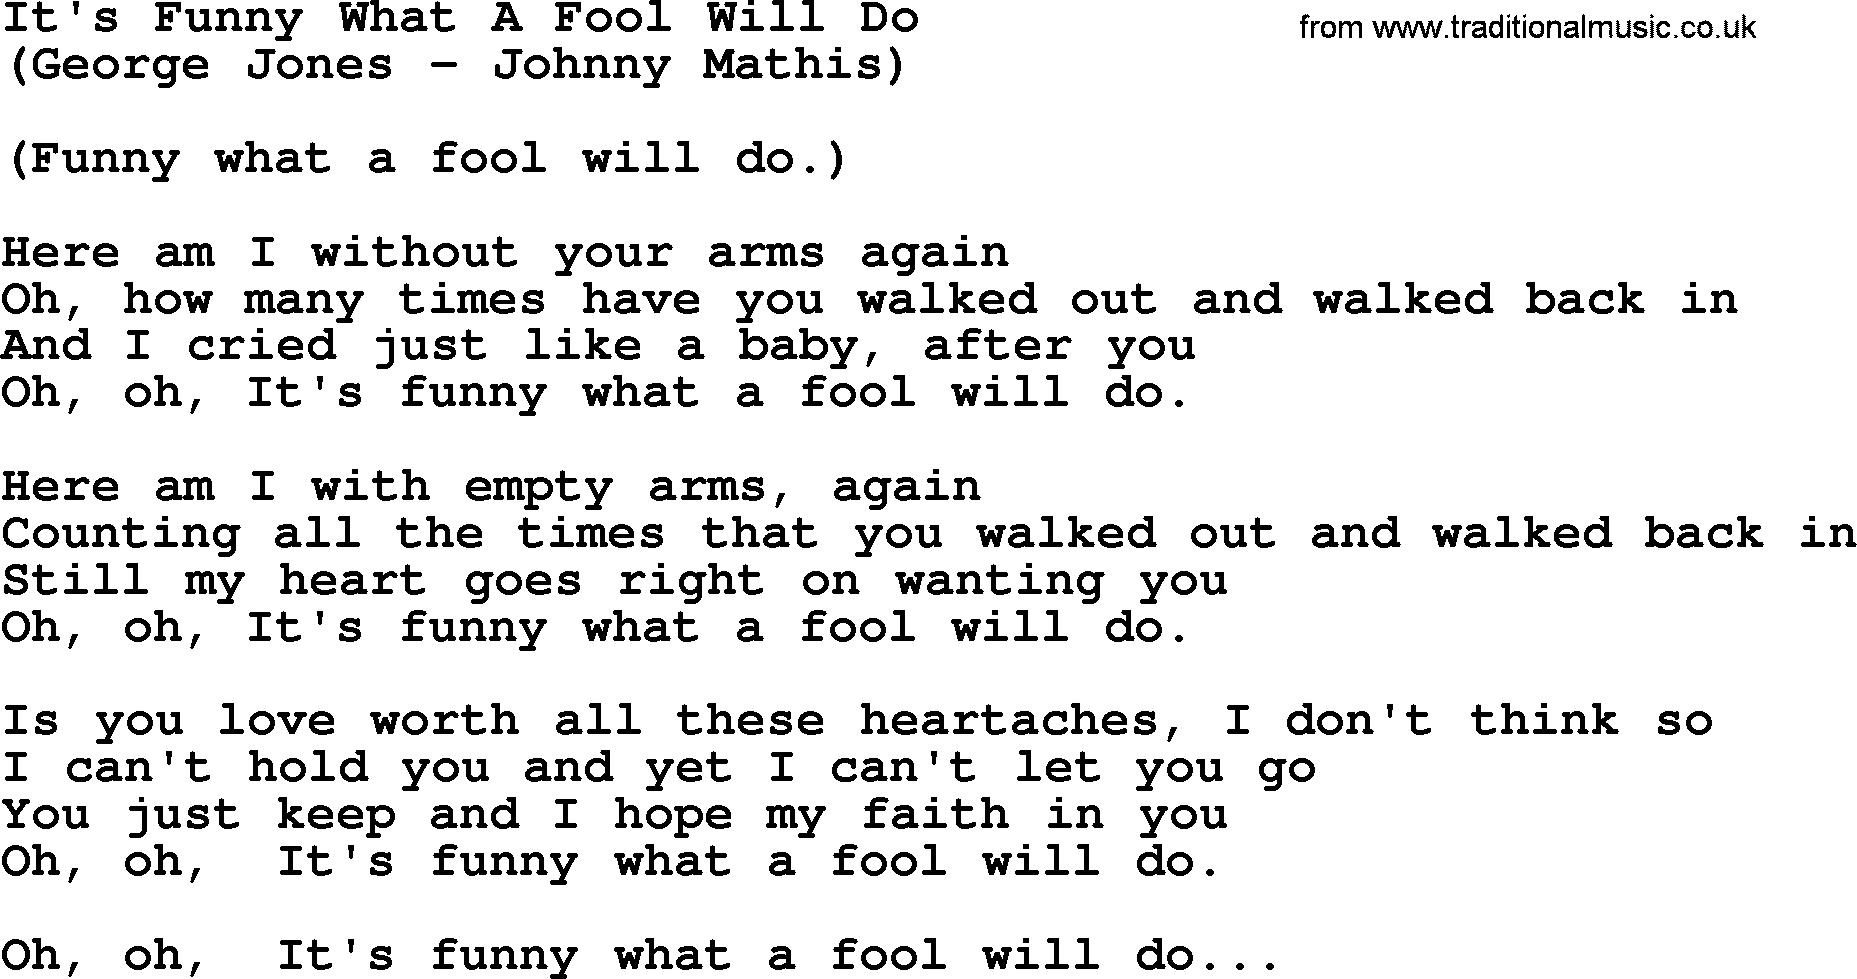 George Jones song: It's Funny What A Fool Will Do, lyrics